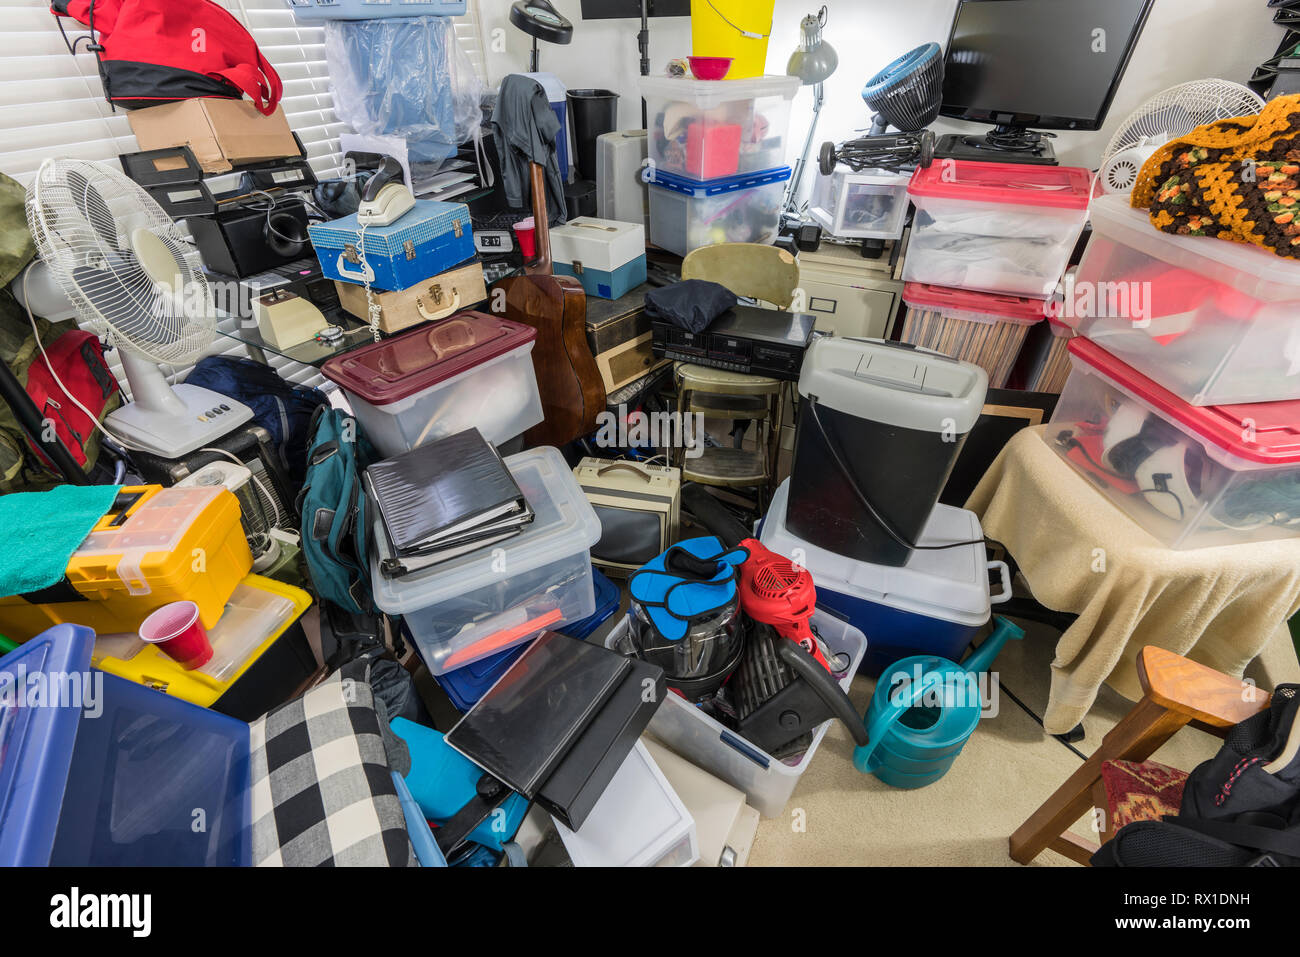 Hoarder room packed with storage boxes, old electronics, files, business equipment and household items. Stock Photo